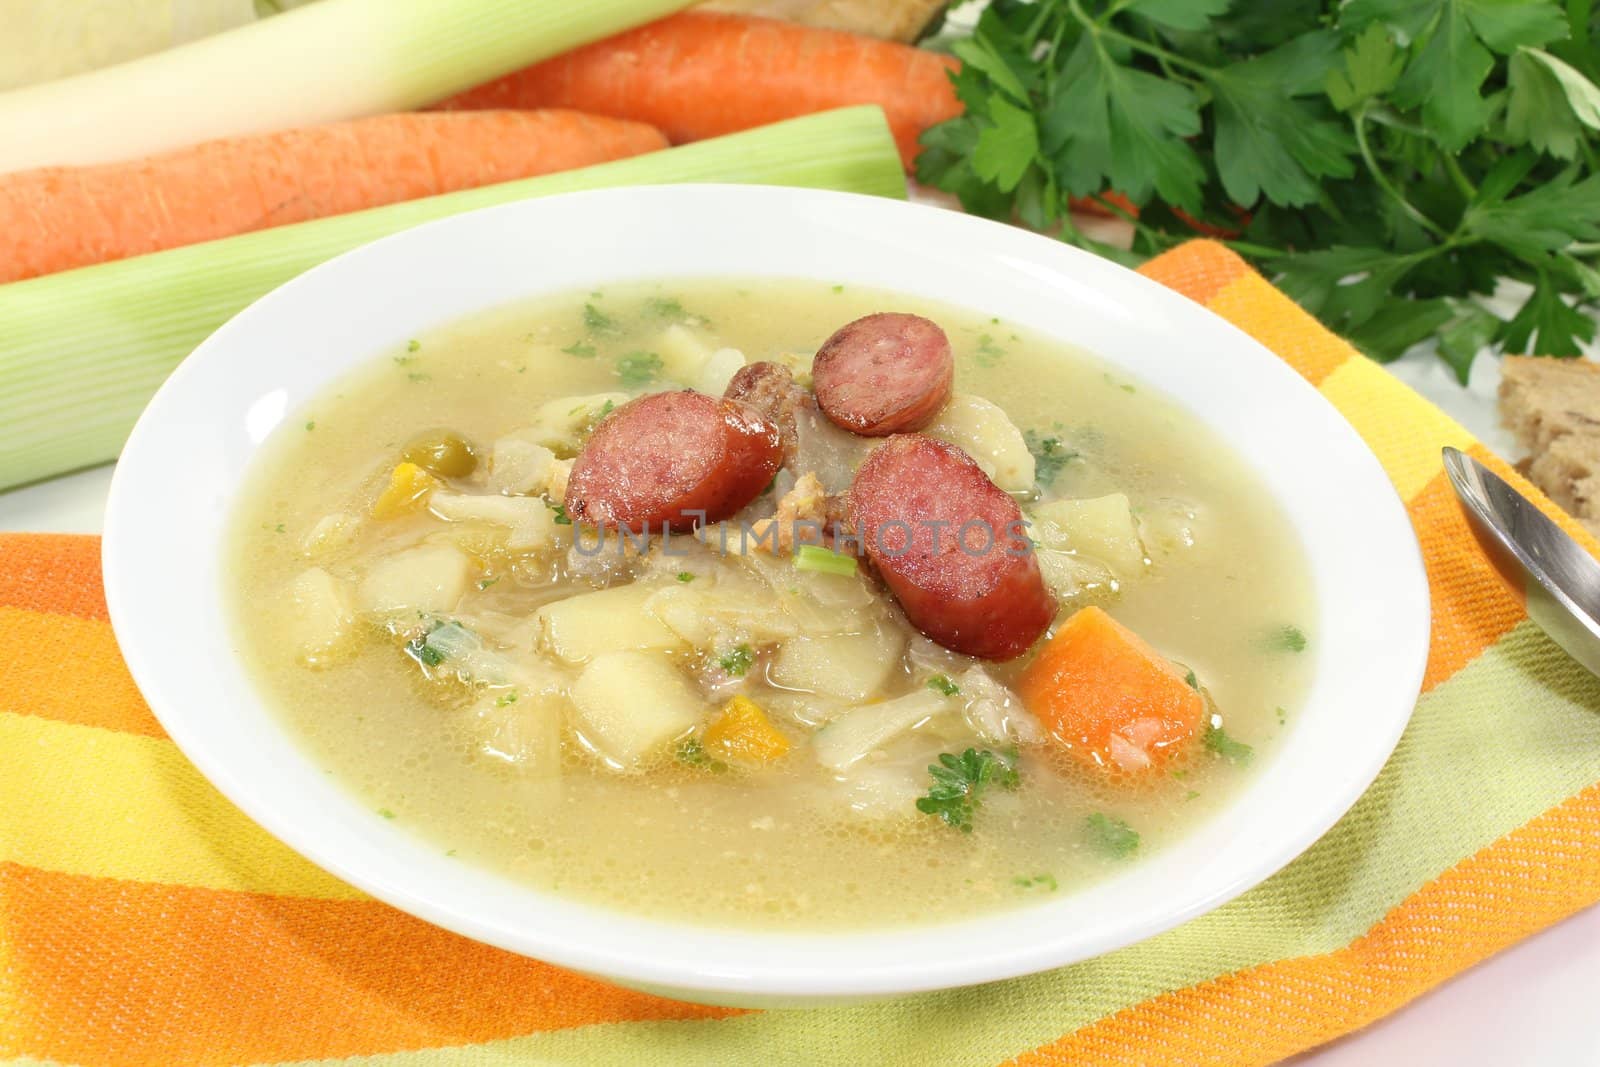 fresh white cabbage soup with vegetables, fried sausage and bread